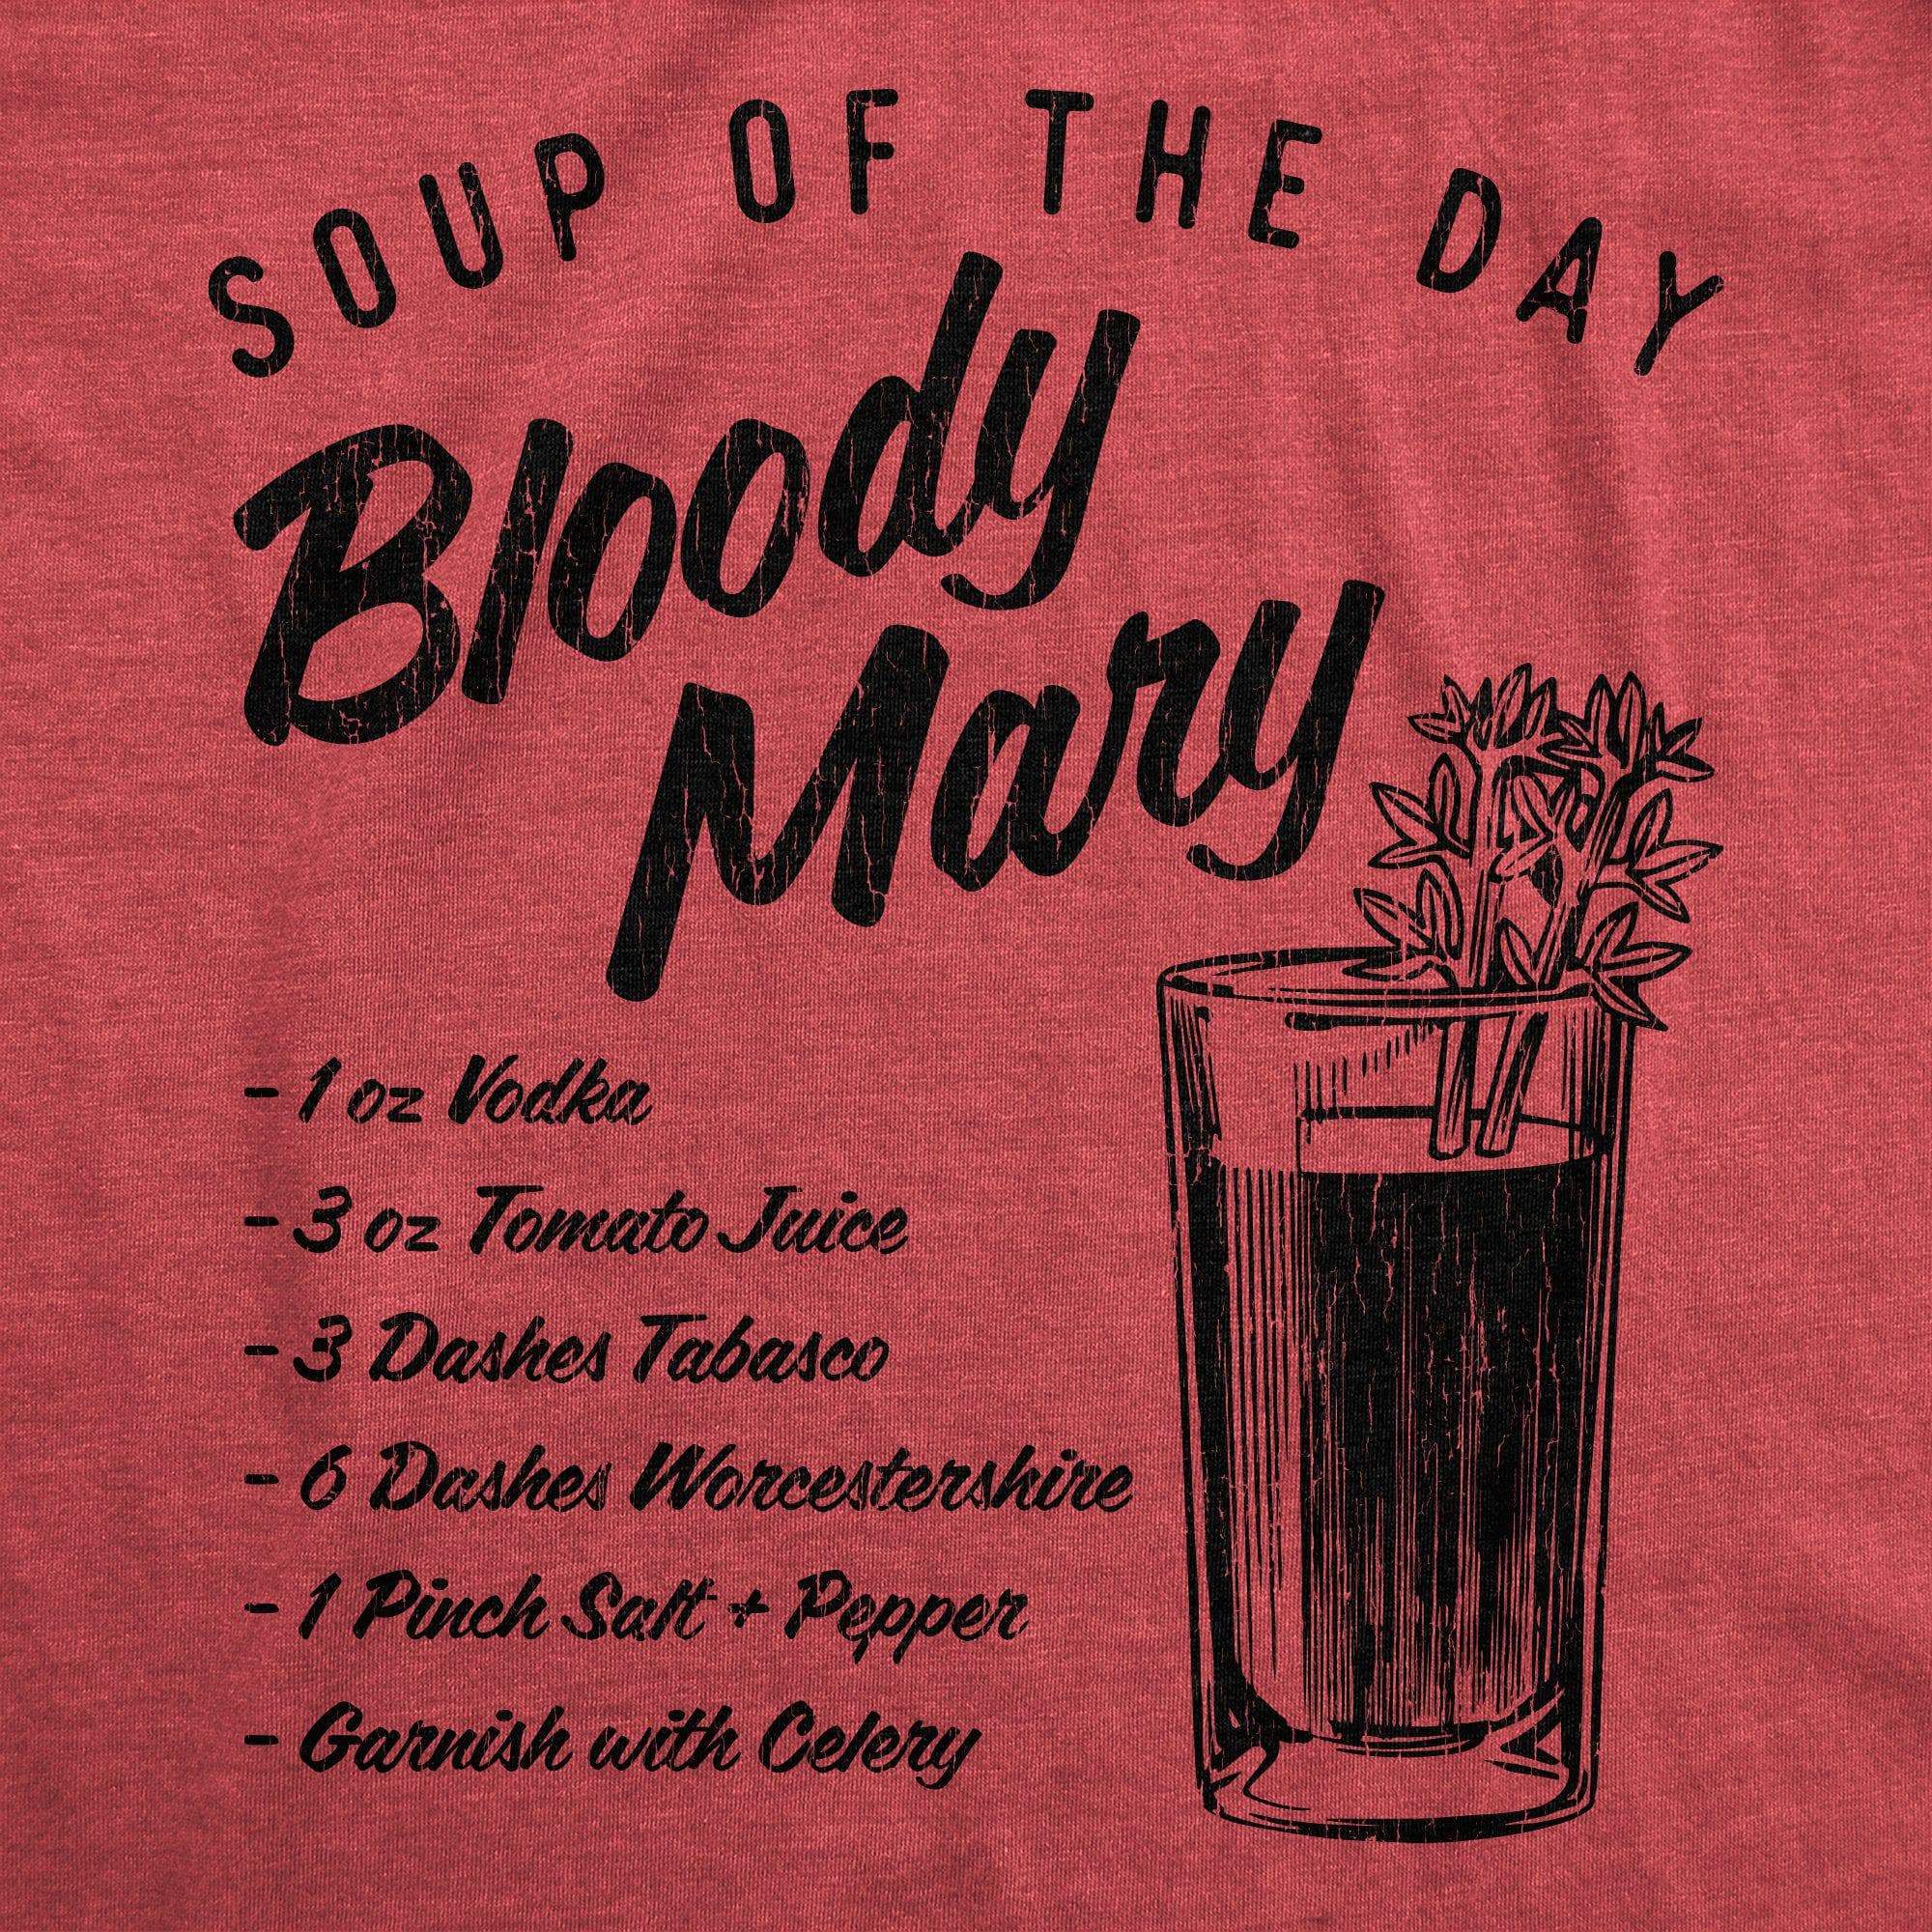 Soup Of The Day Bloody Mary Men's Tshirt - Crazy Dog T-Shirts